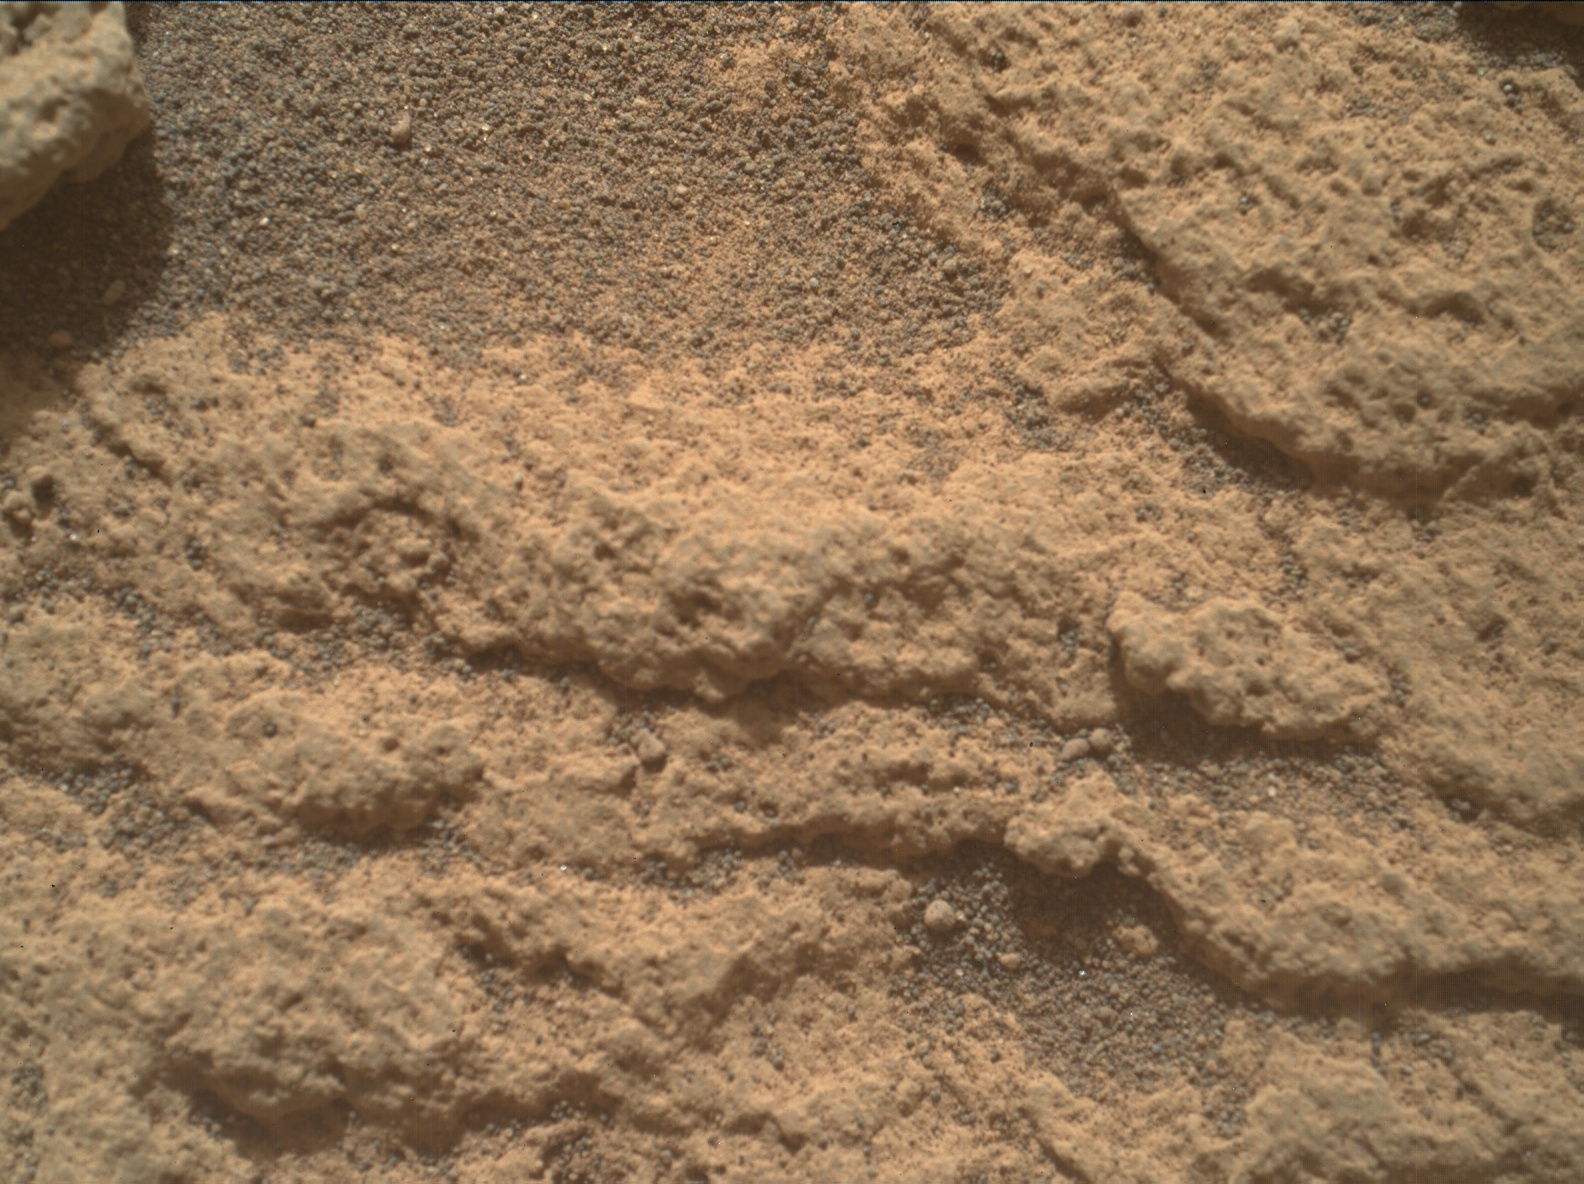 Nasa's Mars rover Curiosity acquired this image using its Mars Hand Lens Imager (MAHLI) on Sol 3419